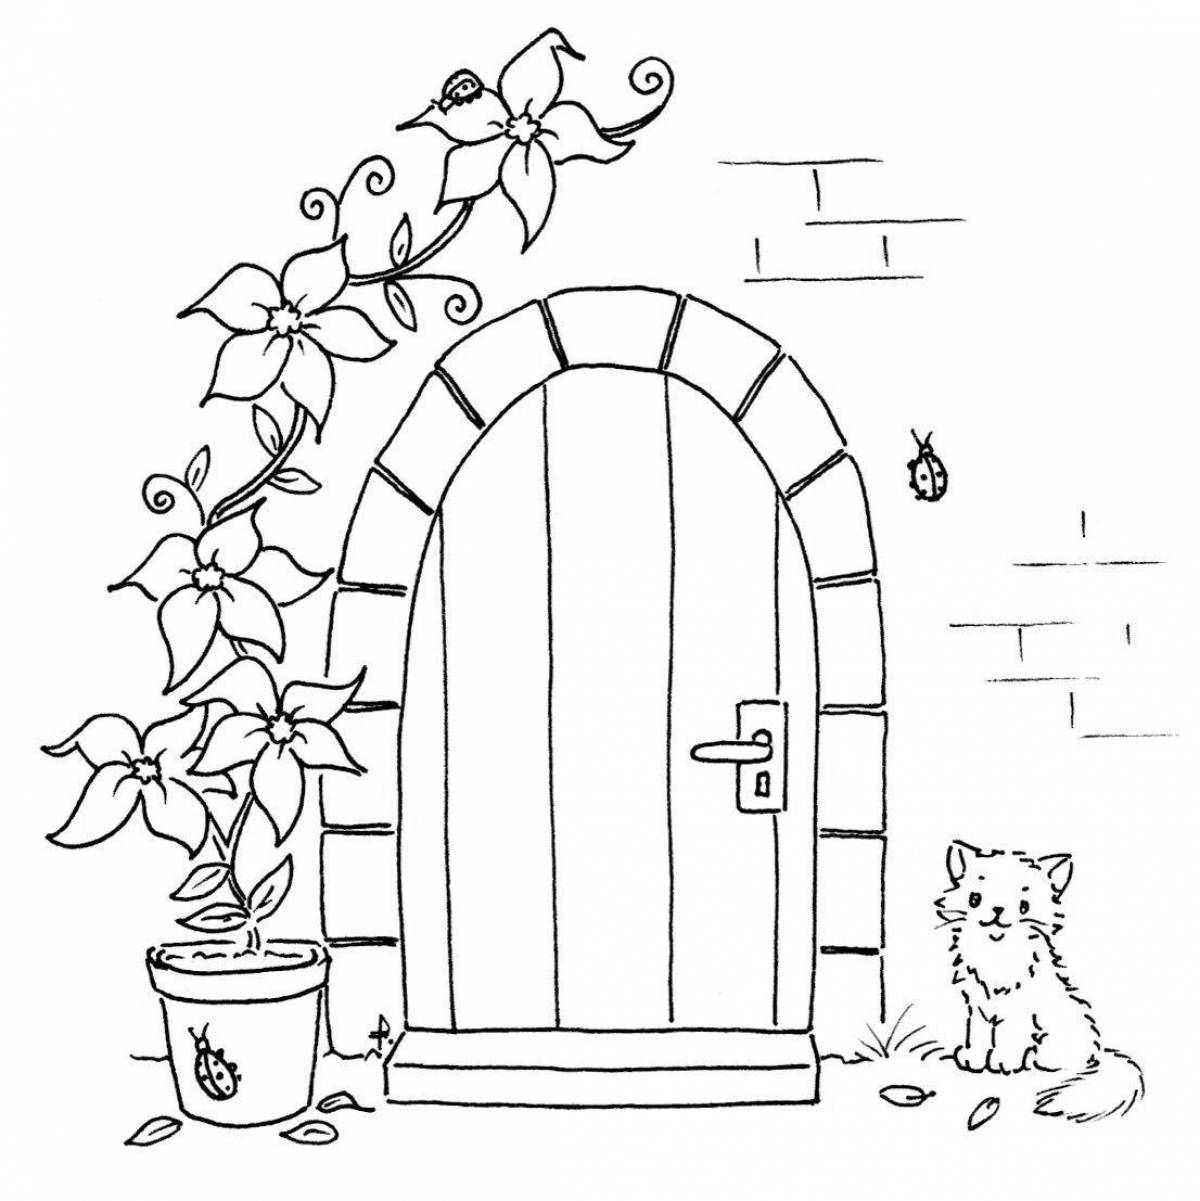 Coloring page jubilant knock on my door